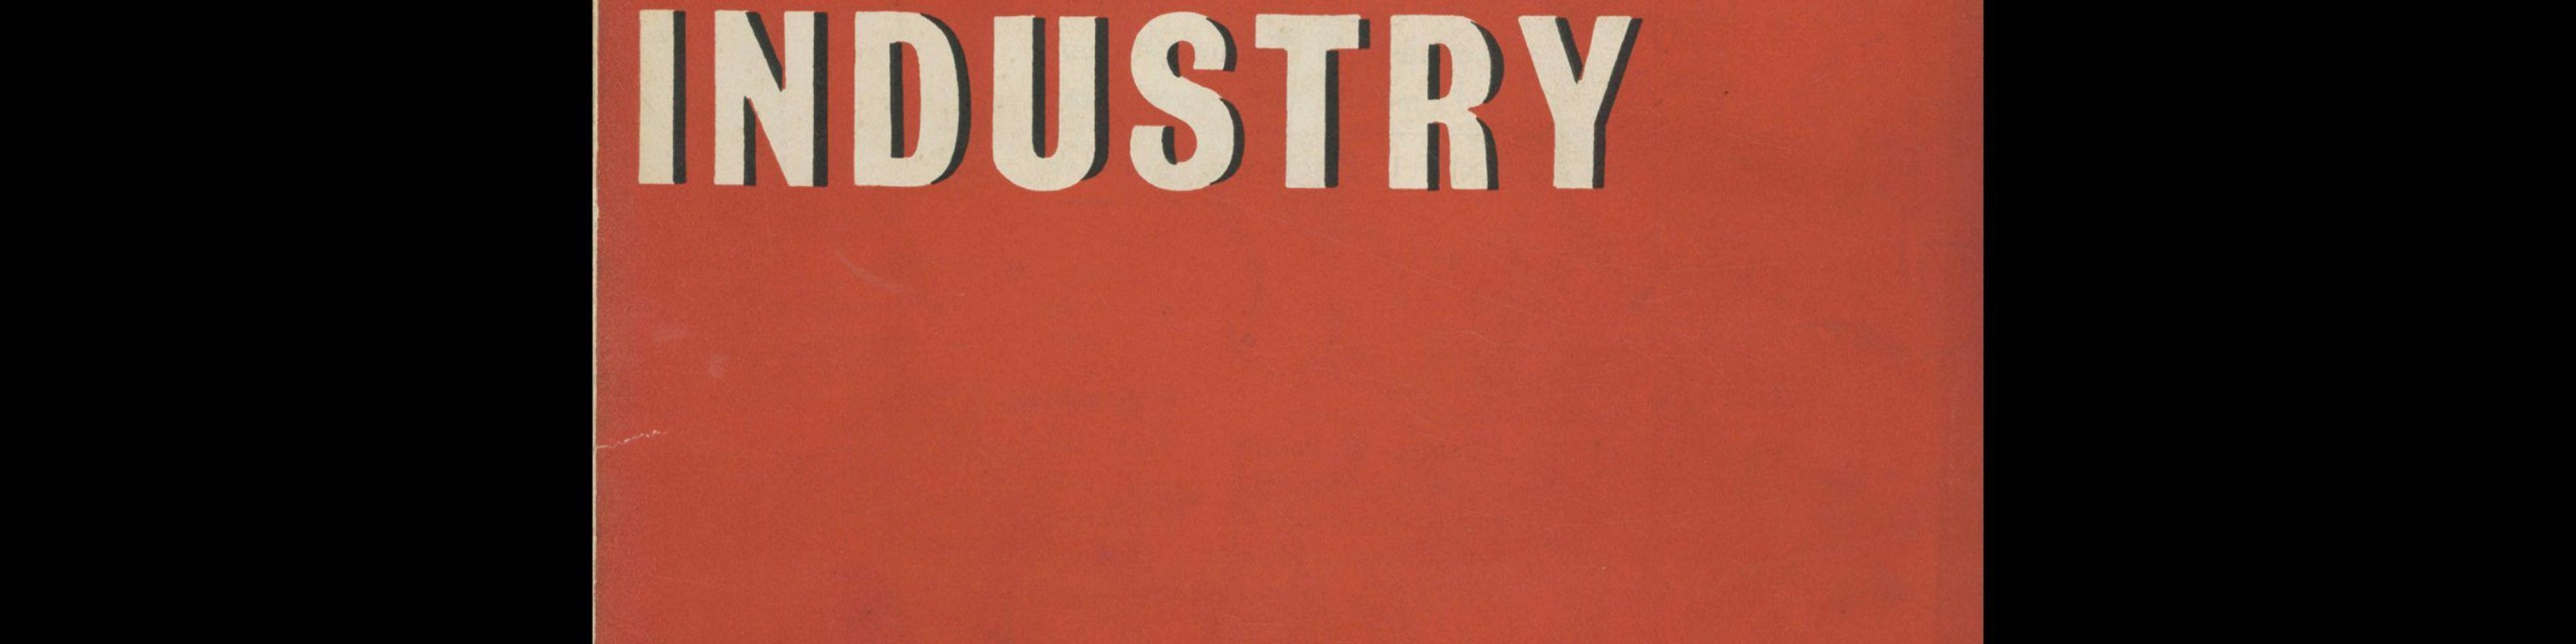 Commercial Art and Industry 102, December 1934